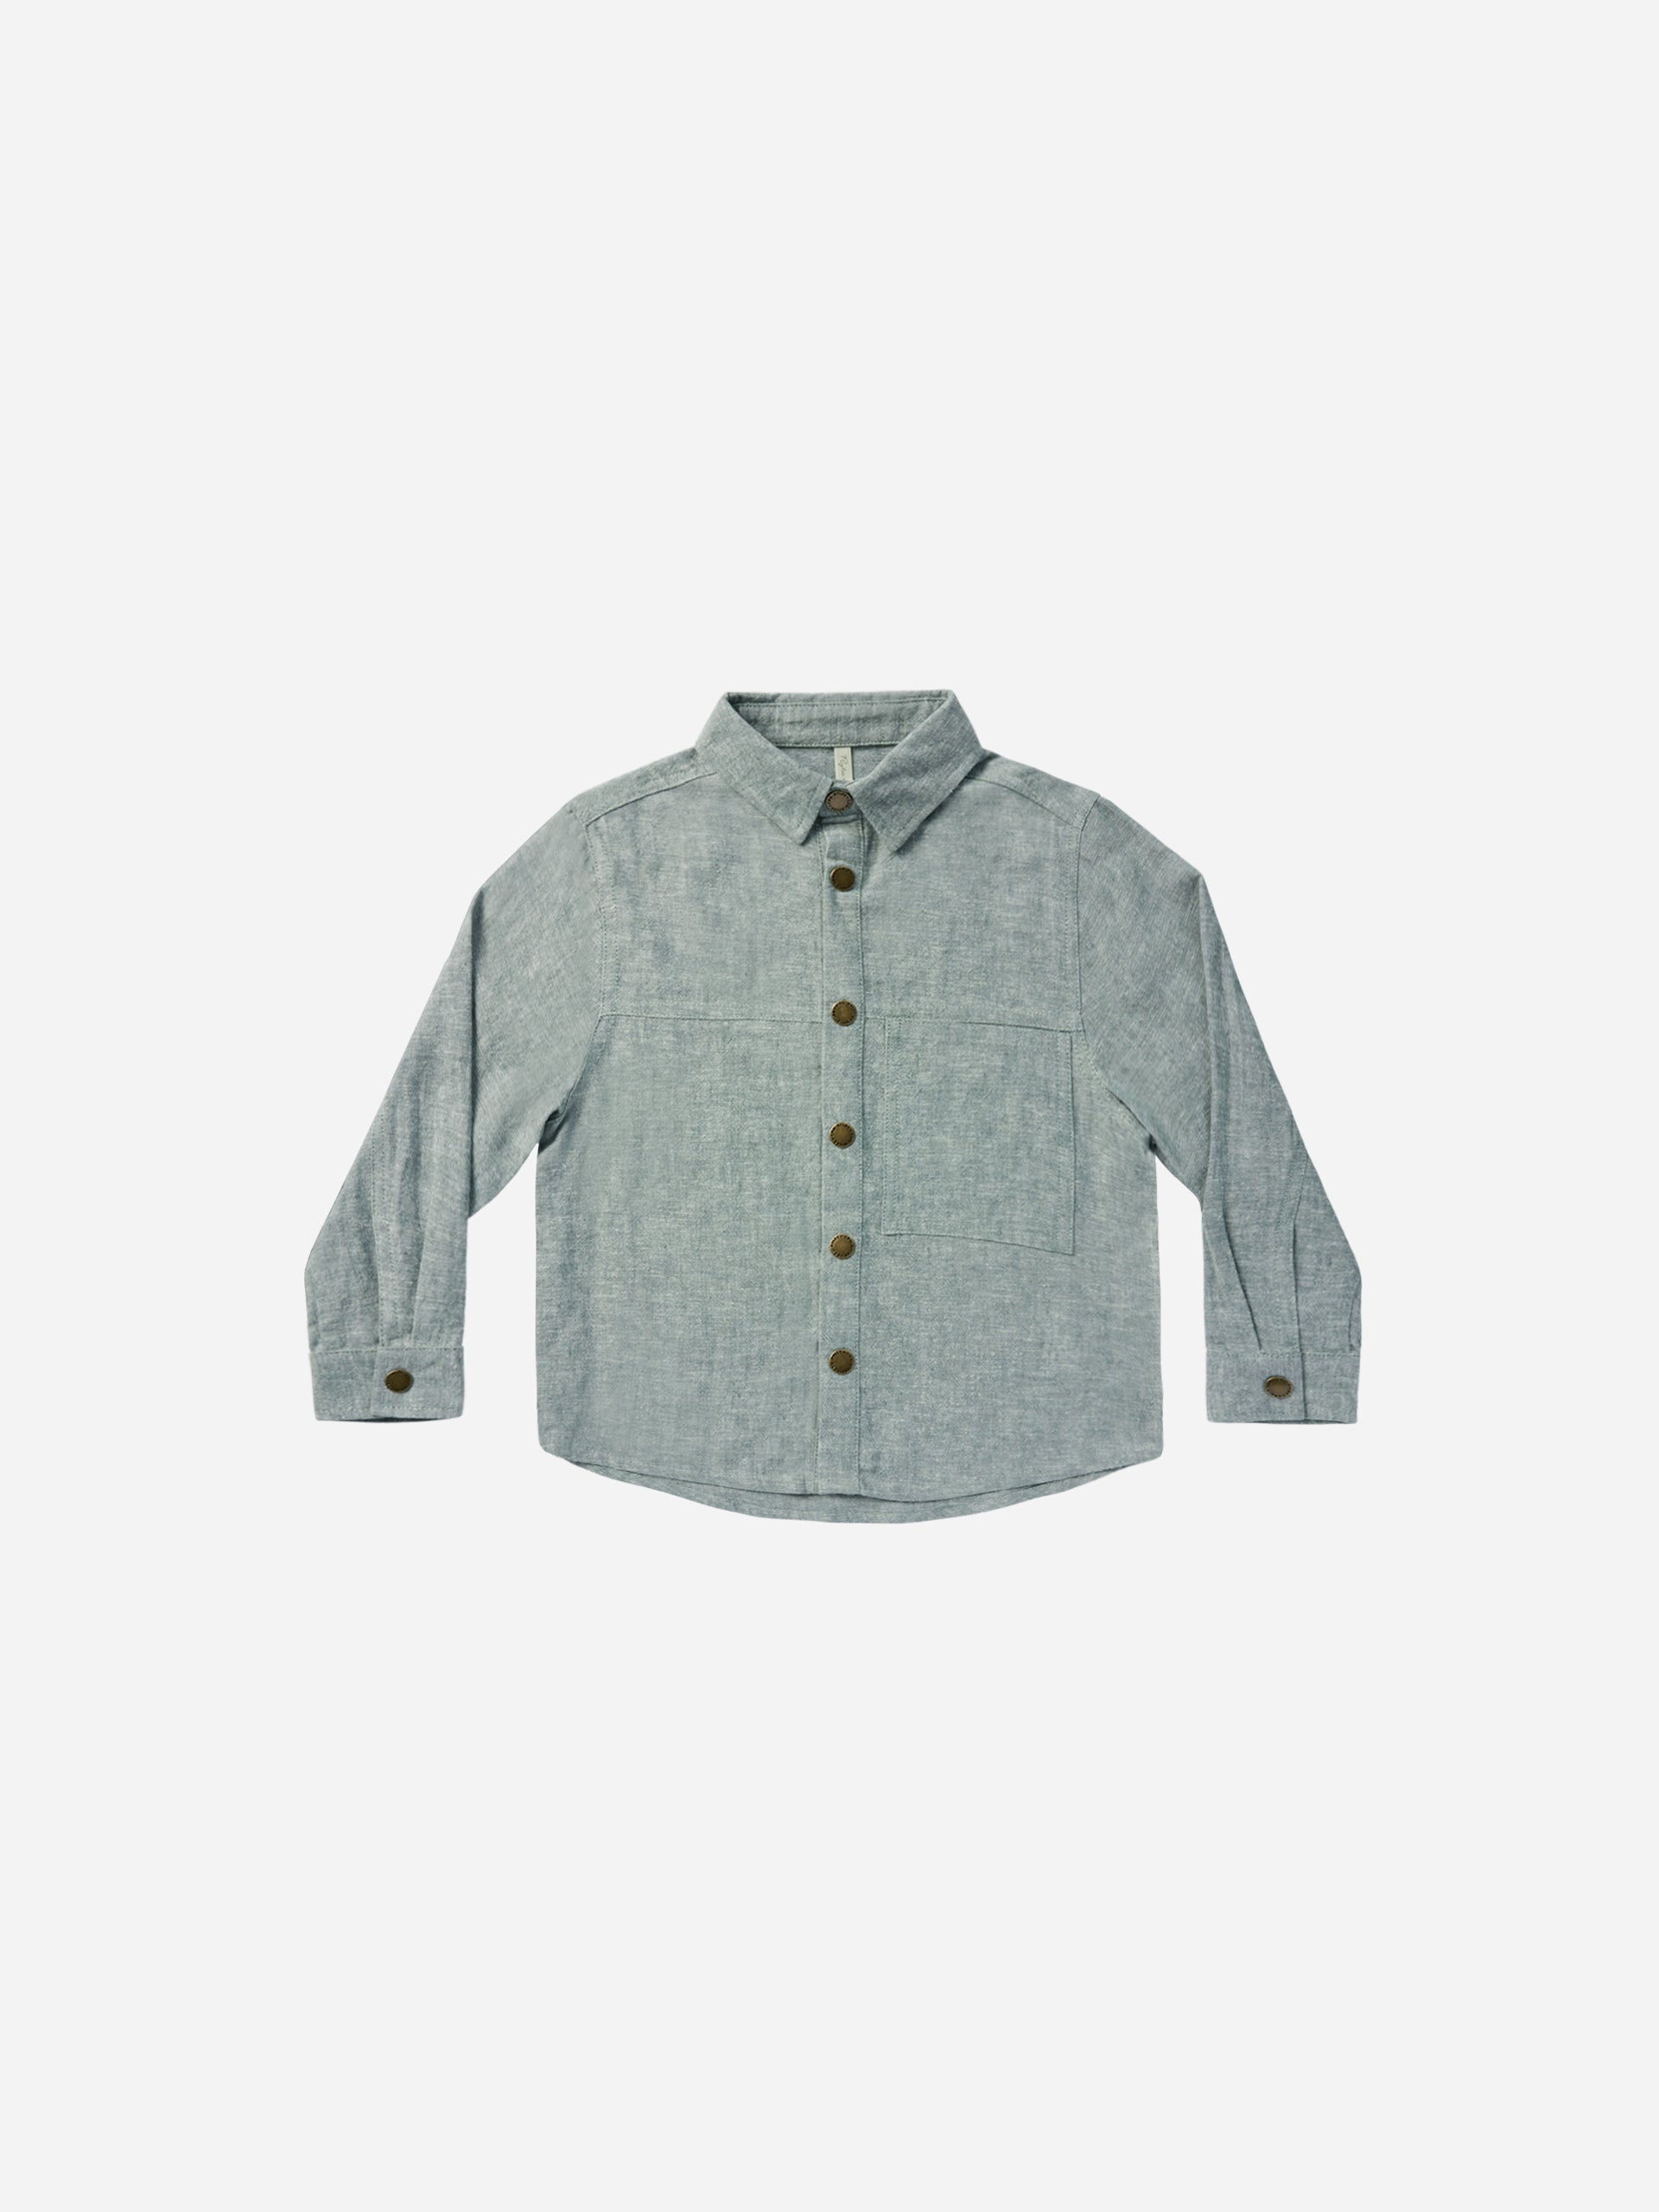 Walker Overshirt || Indigo - Rylee + Cru | Kids Clothes | Trendy Baby Clothes | Modern Infant Outfits |